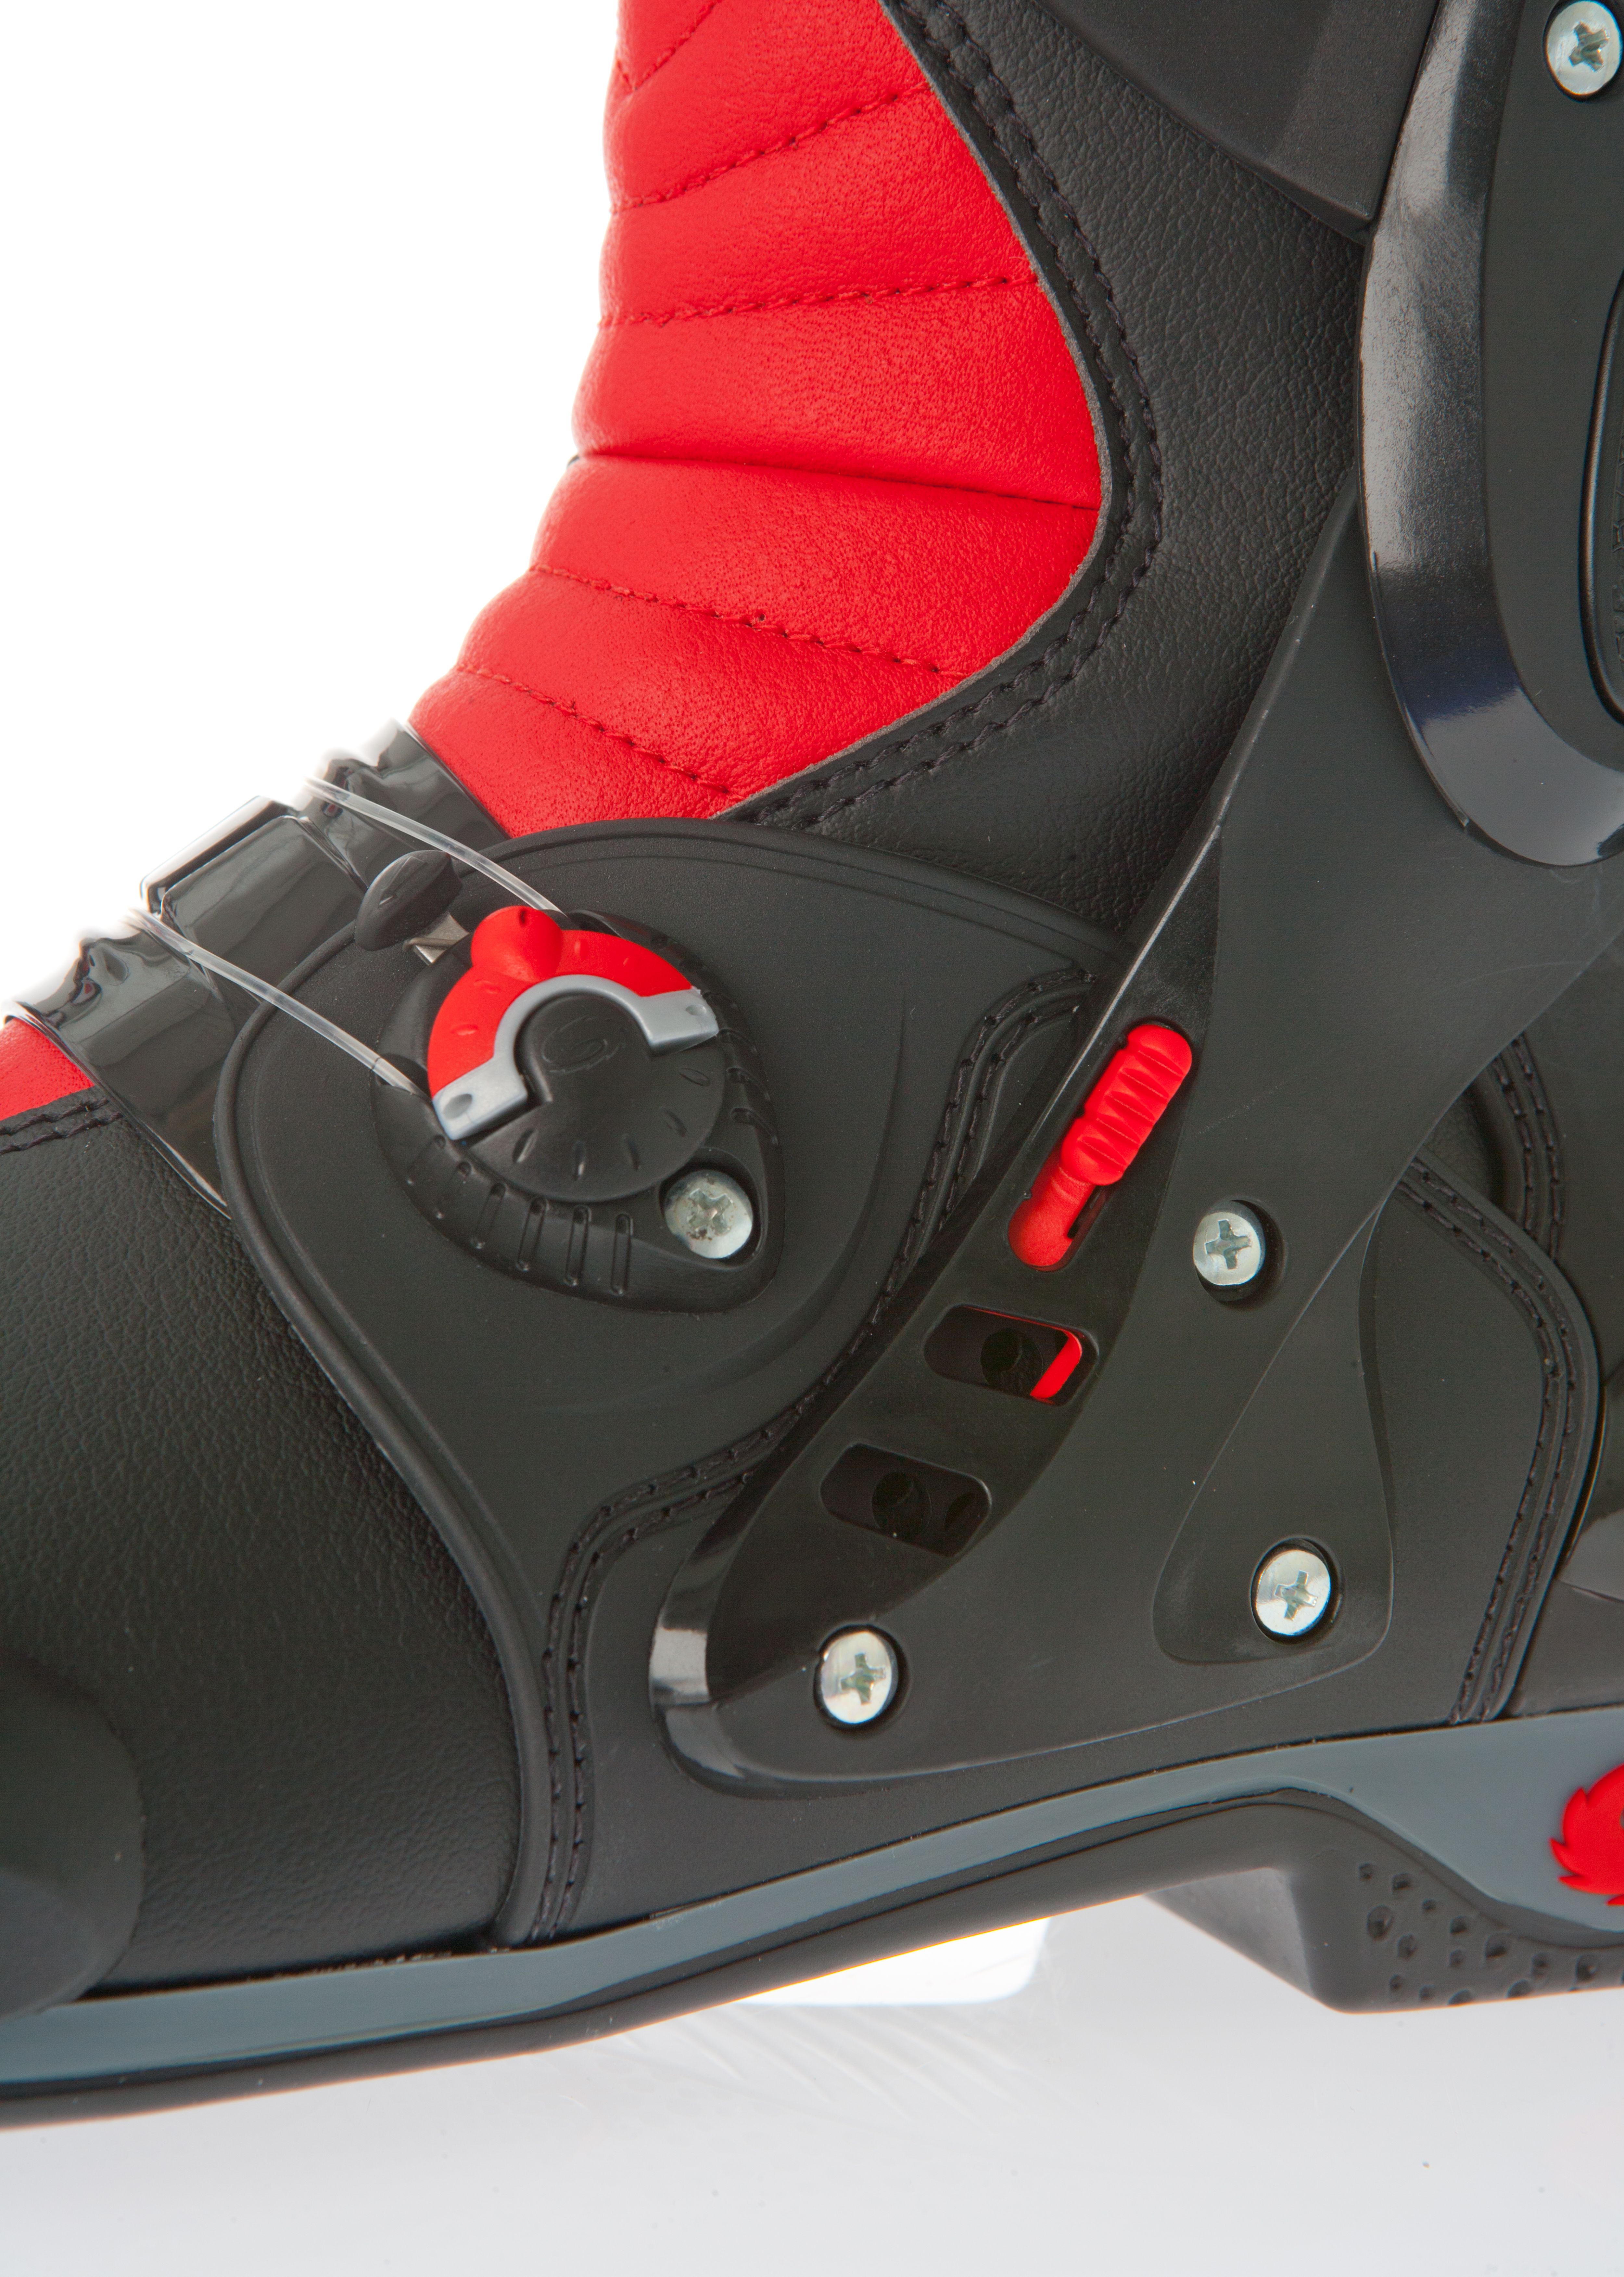 Review: Sidi Vortice boots - £299.99